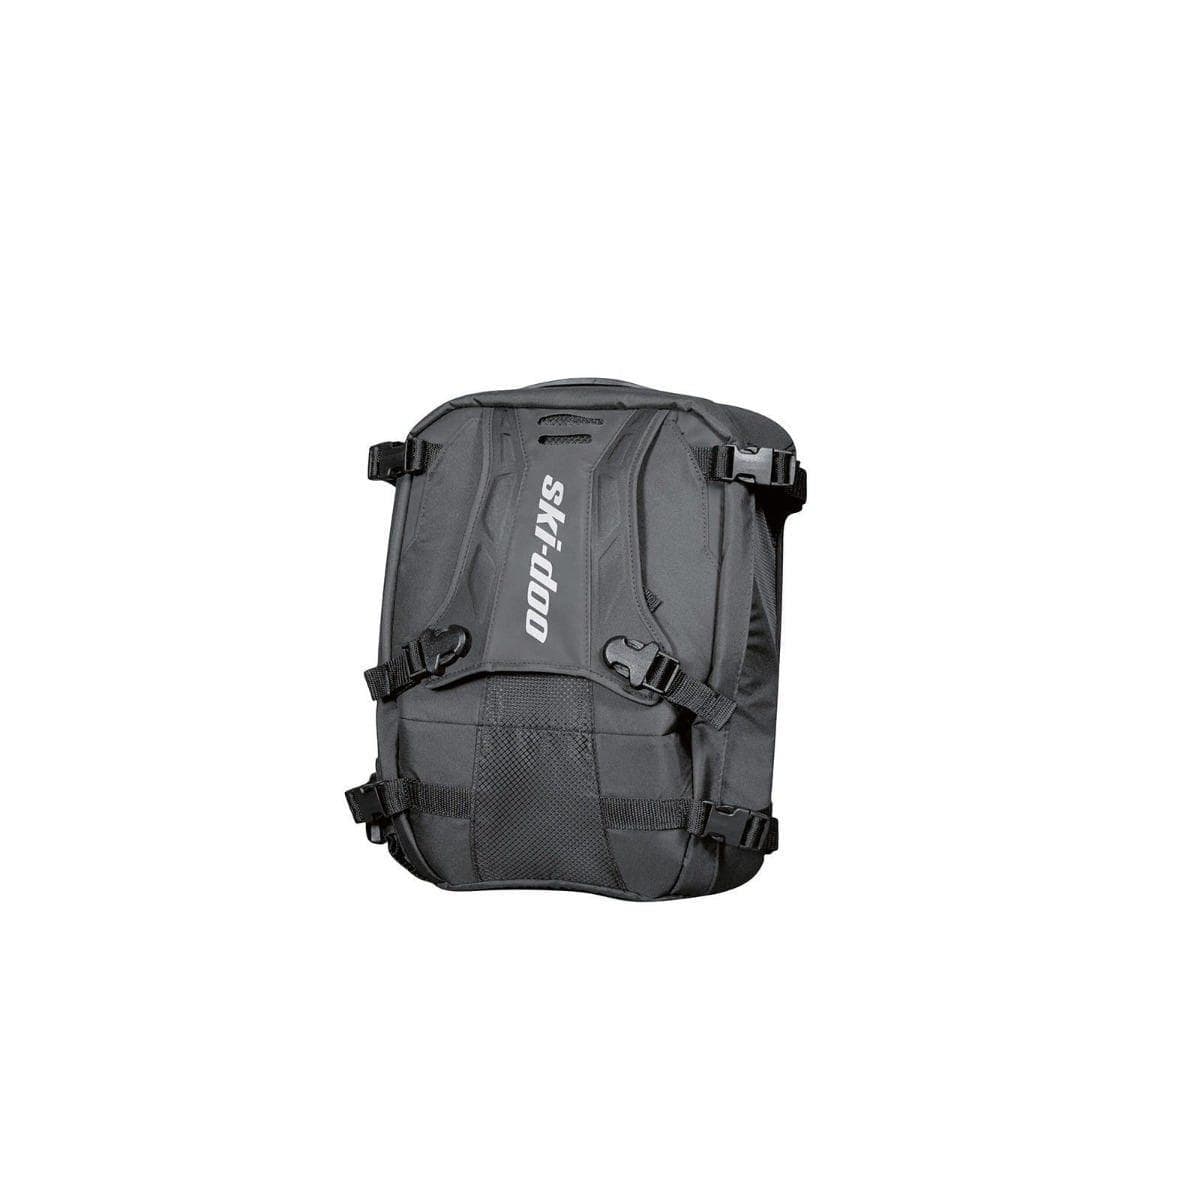 Slim Tunnel Bag with soft straps - 15 L - Factory Recreation